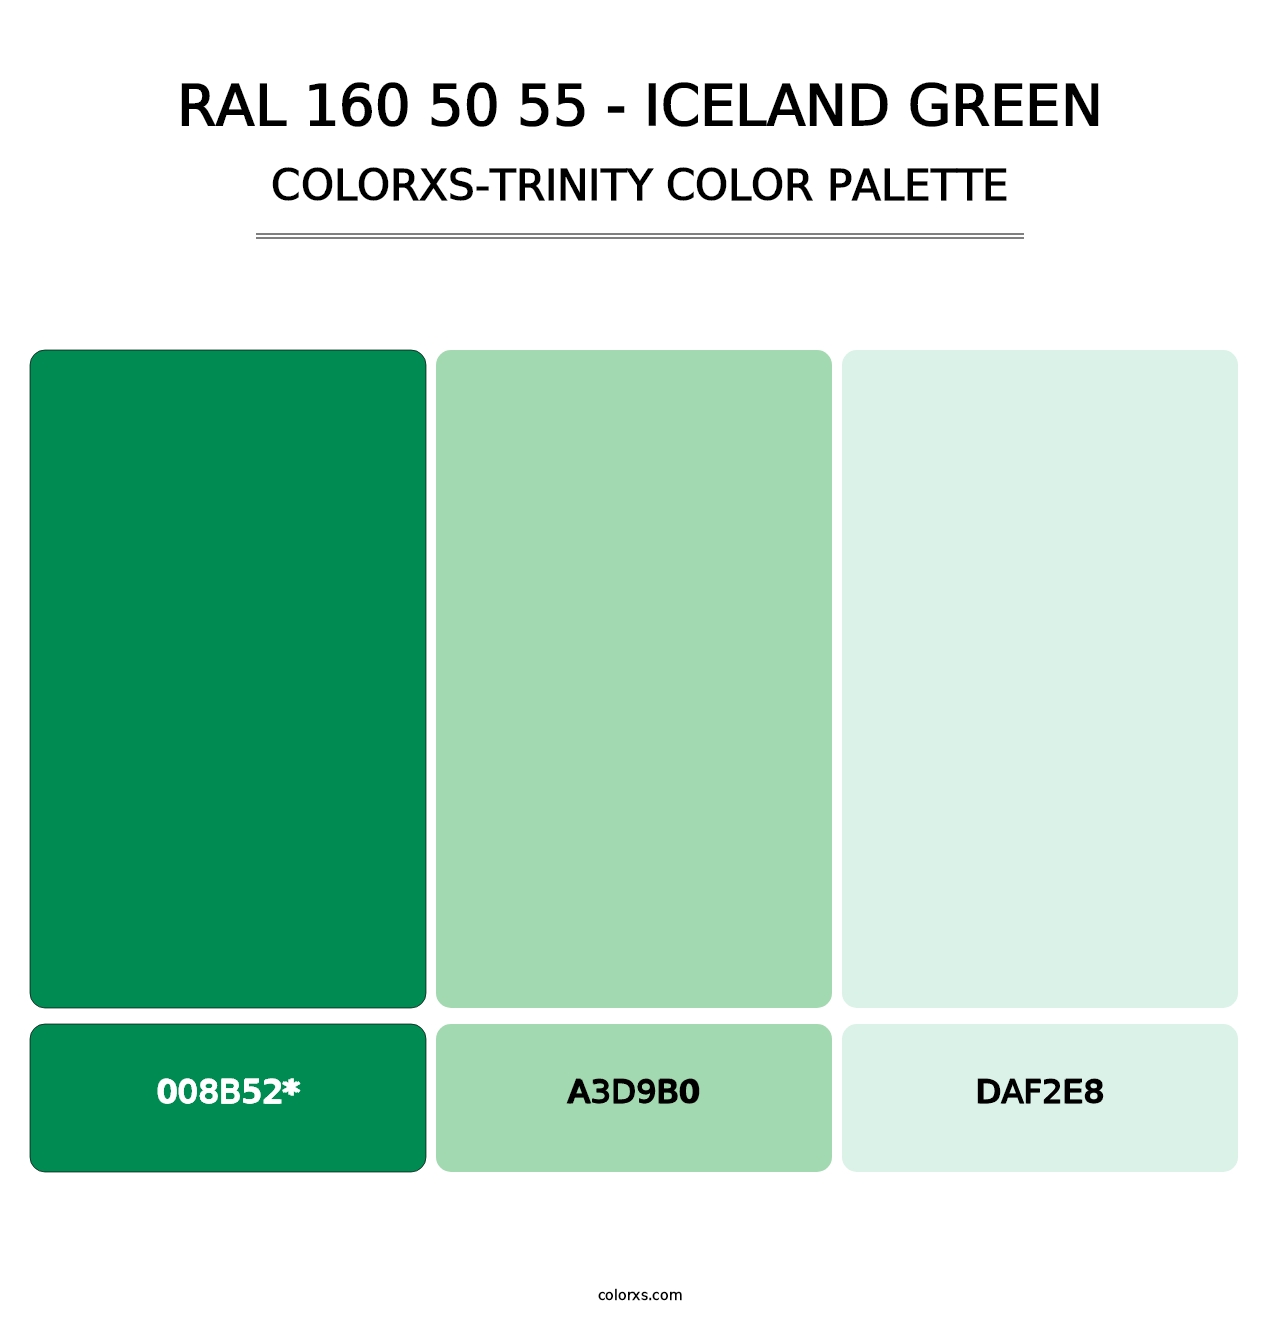 RAL 160 50 55 - Iceland Green - Colorxs Trinity Palette